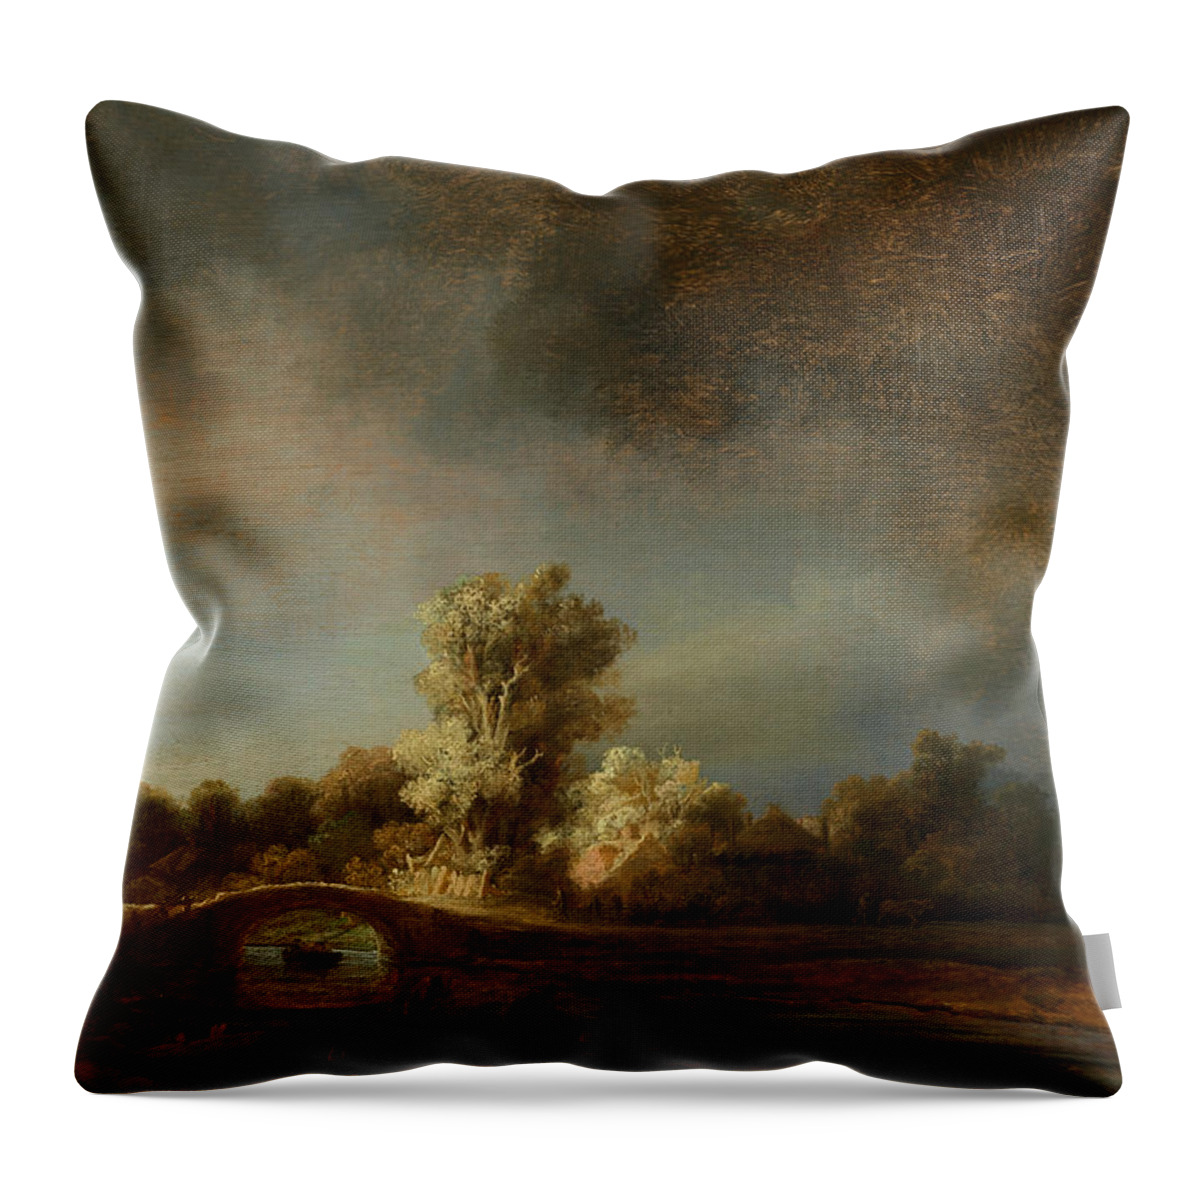 Stone Bridge Throw Pillow featuring the painting Stone Bridge by Rembrandt